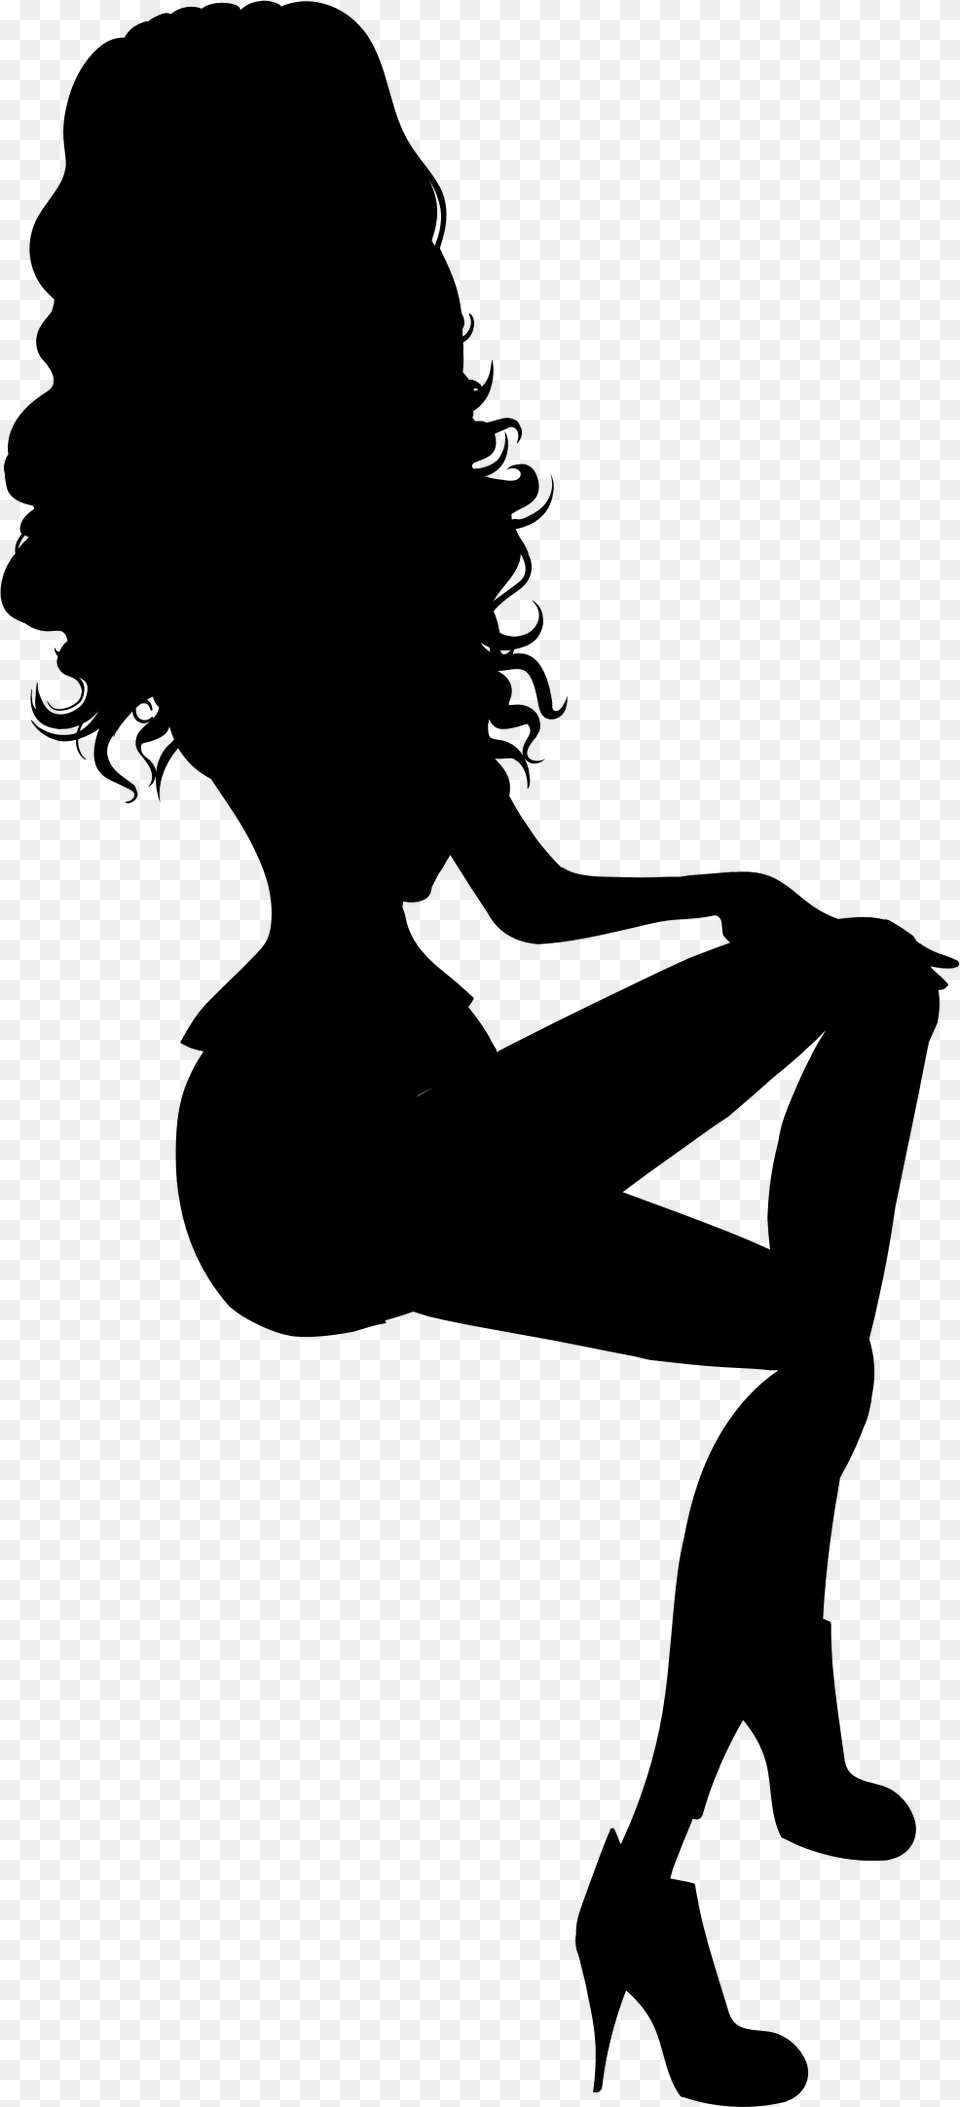 This Icons Design Of Sitting Woman Silhouette, Gray Free Transparent Png